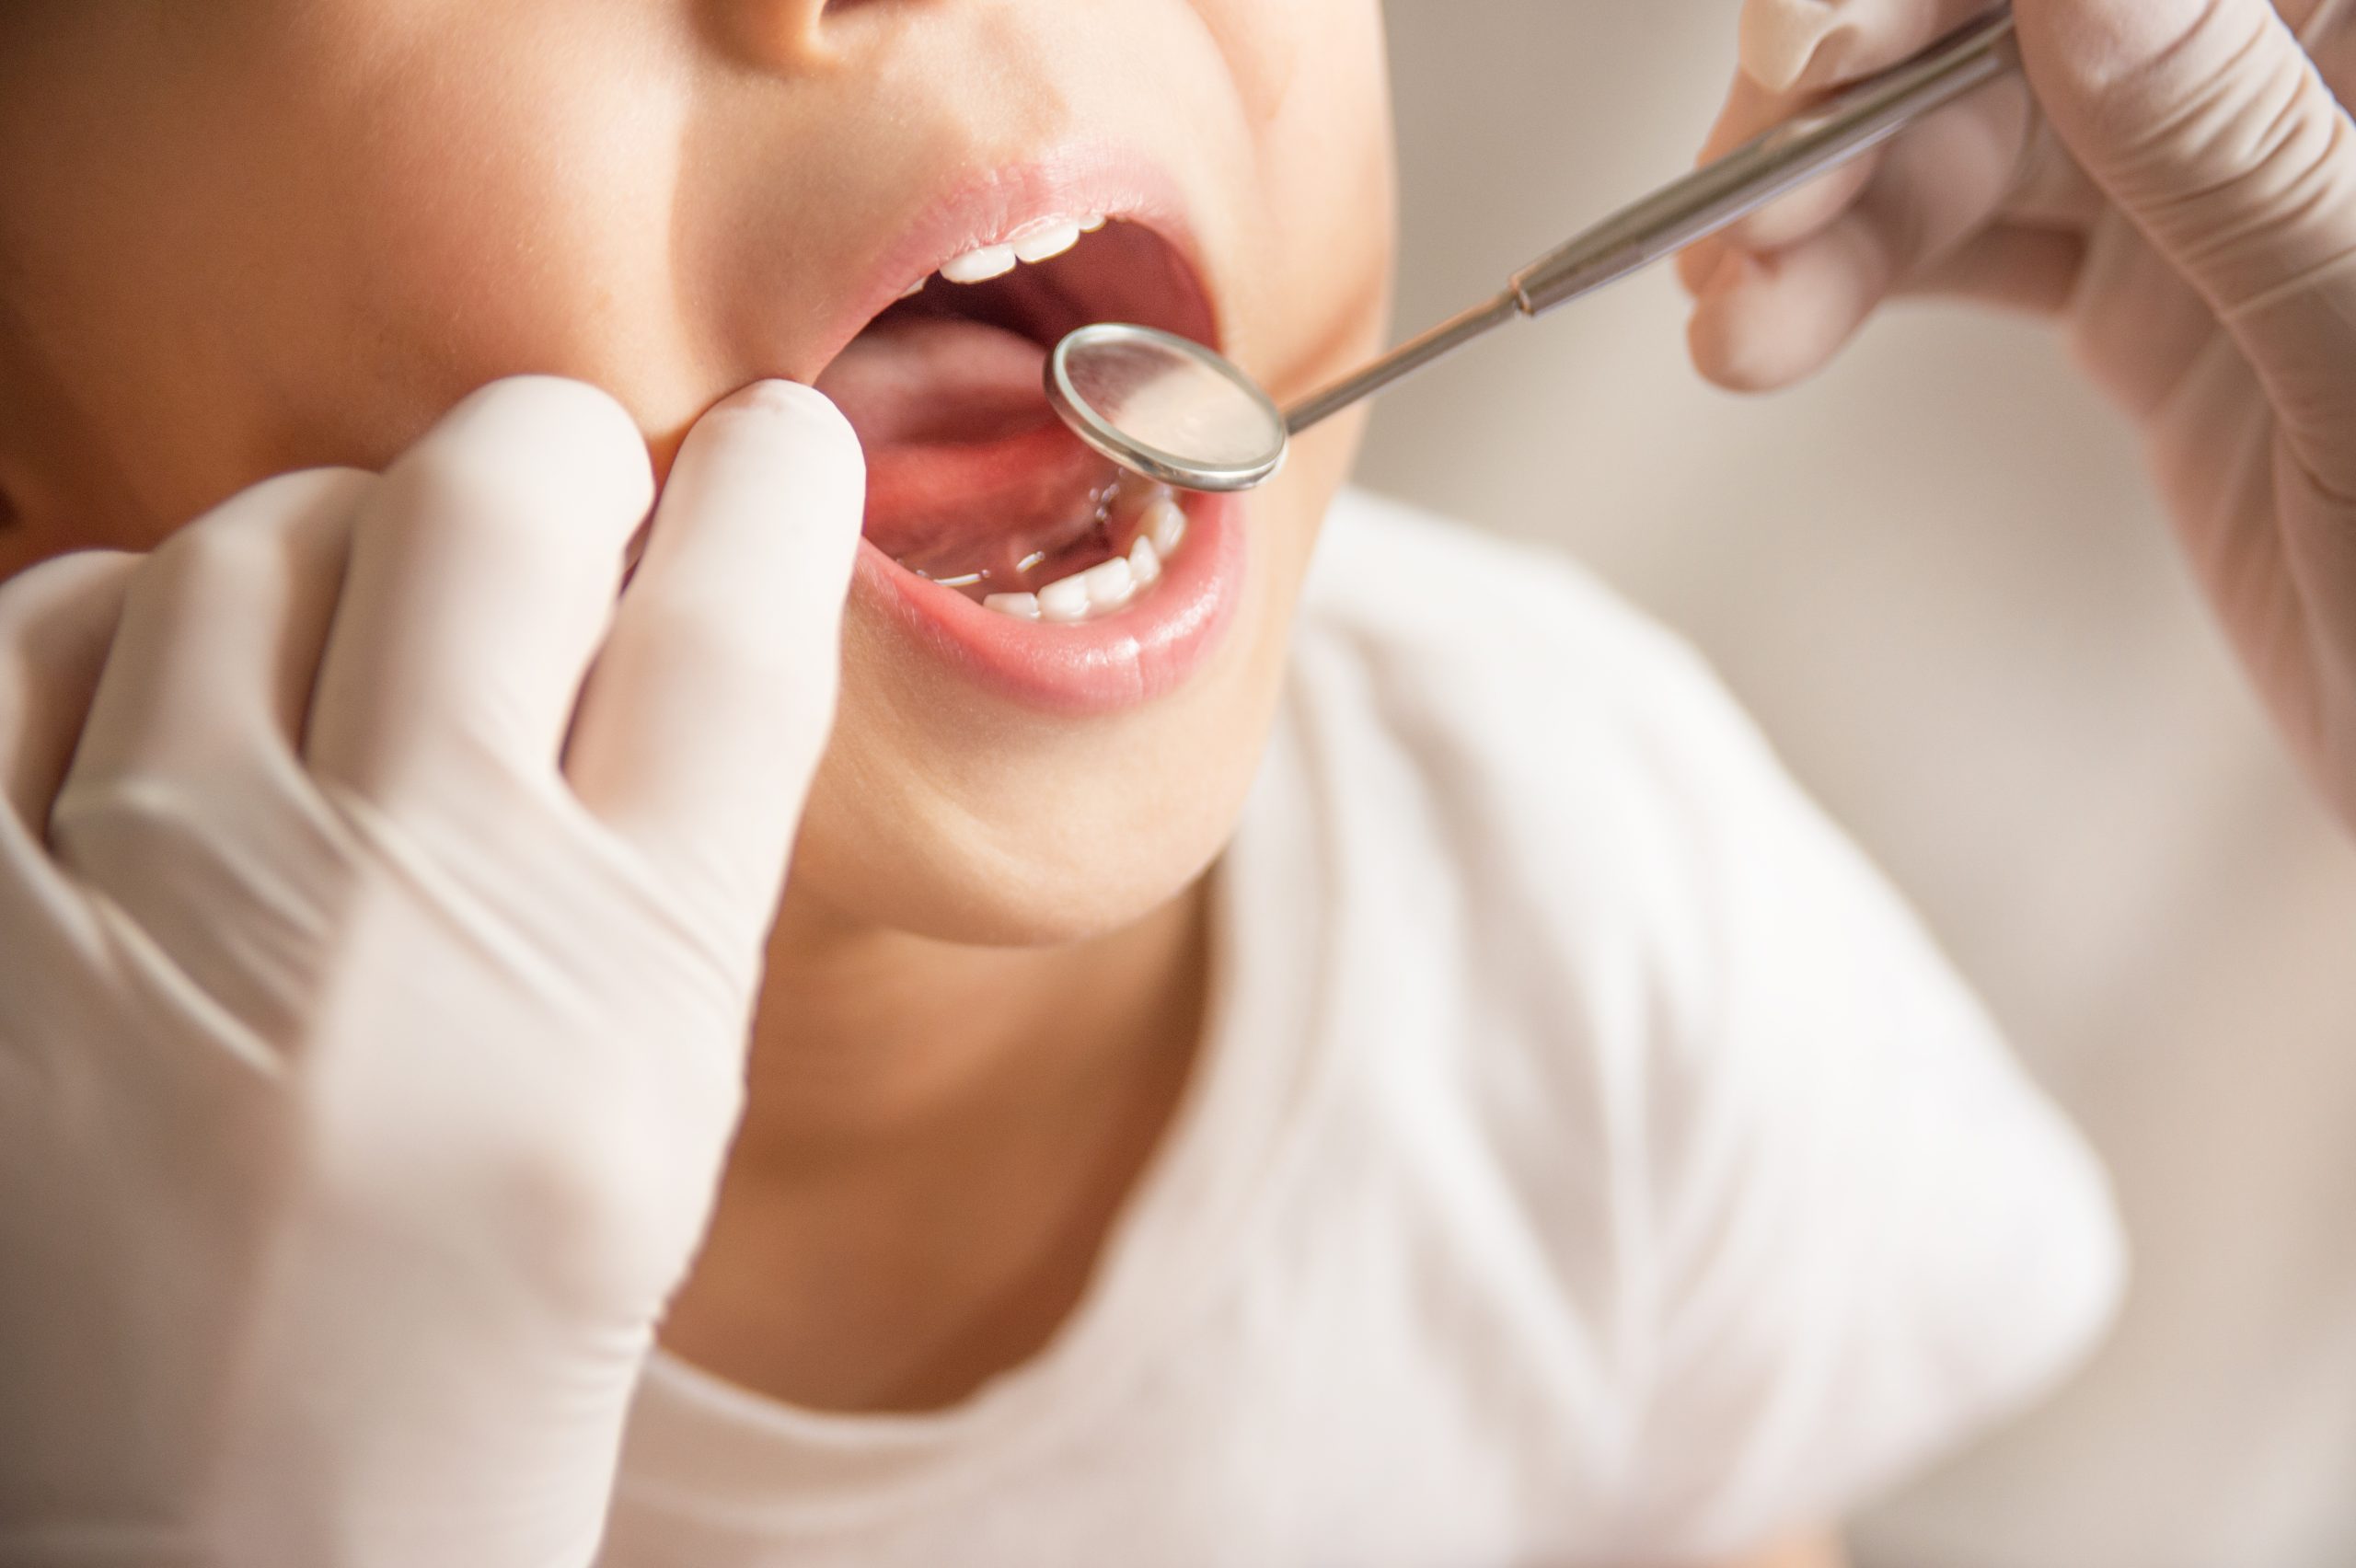 The BDA has warned that the oral health of children is set to worsen following new research highlighting the lack of access to NHS dentistry.